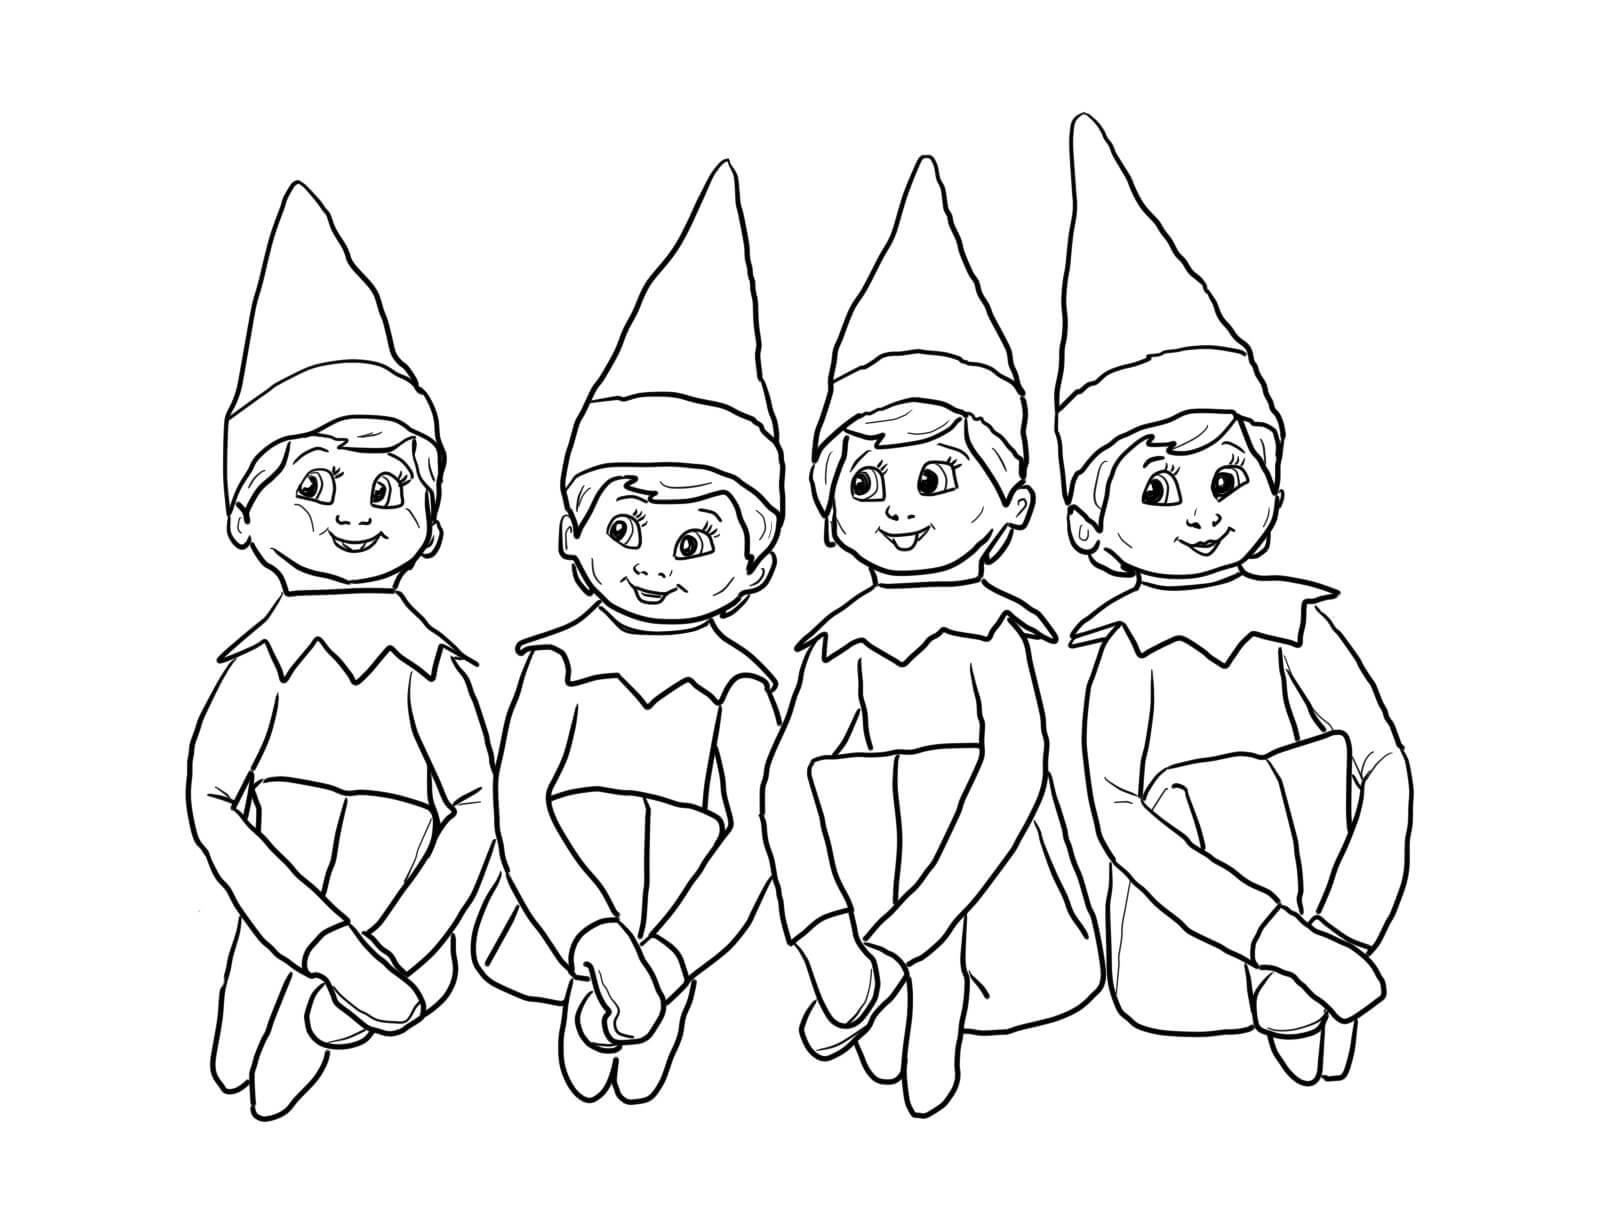 Elves On The Shelf Coloring Page - Free Printable Coloring Pages for Kids